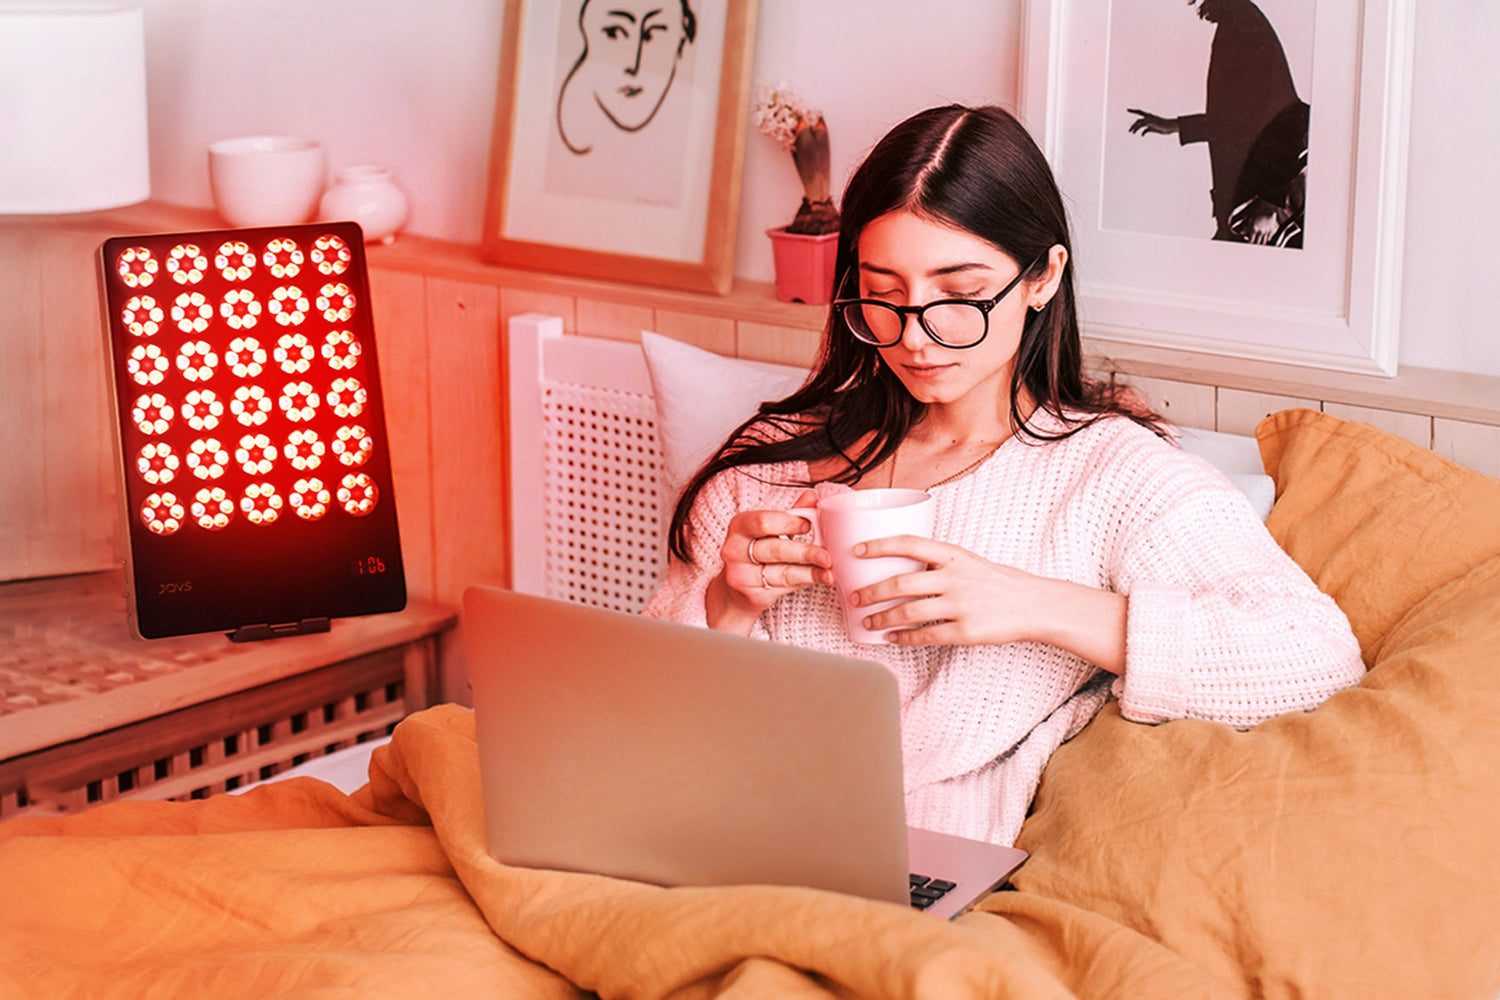 Woman in glasses sitting on bed with laptop and cup, red light therapy device on bedside table.